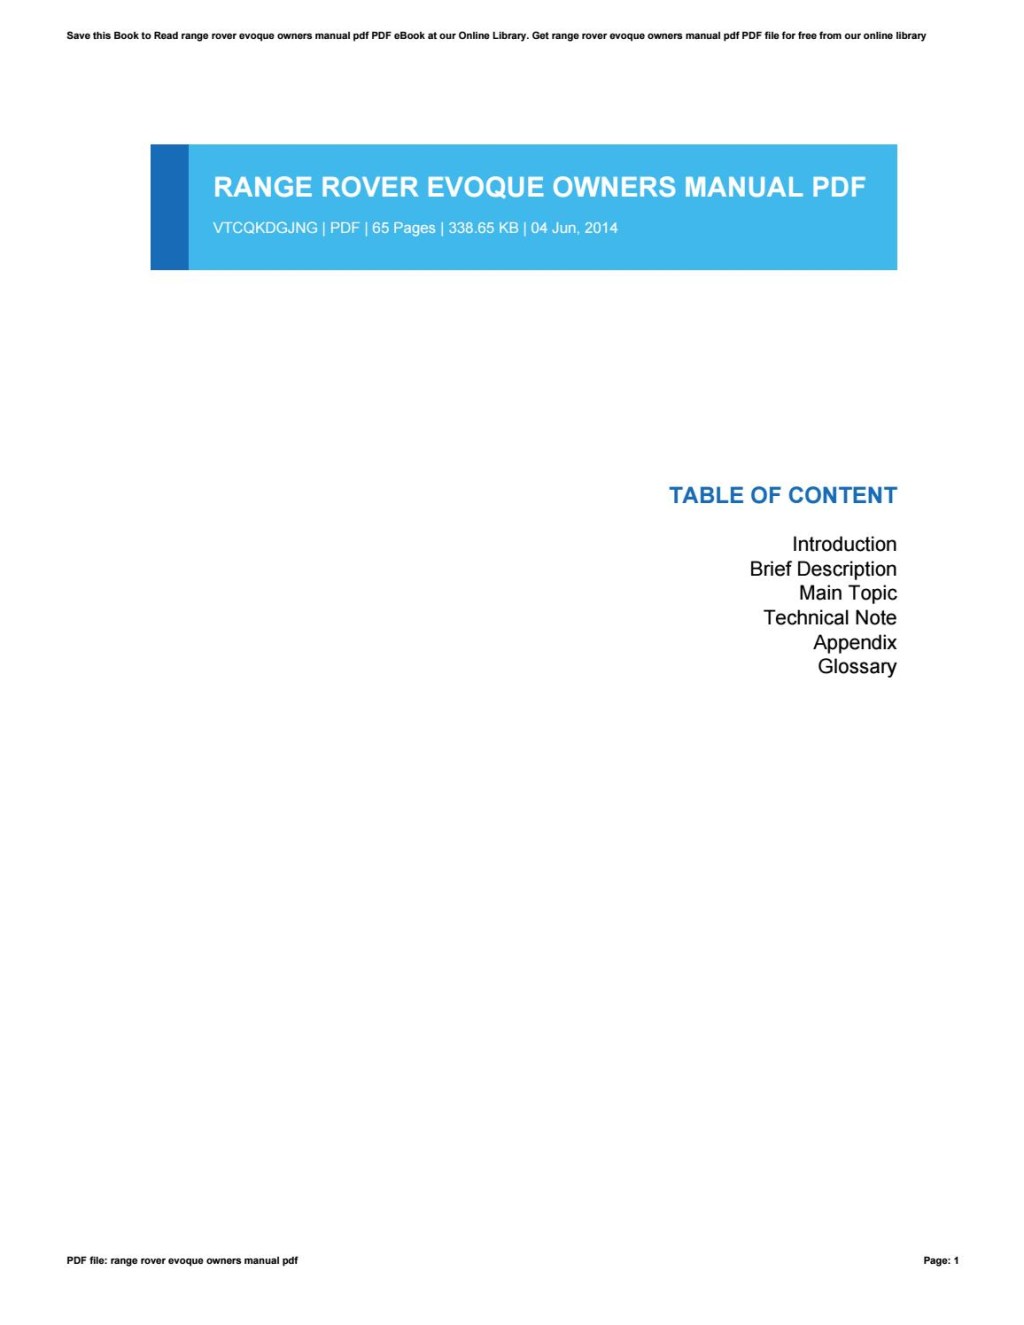 Picture of: Range rover evoque owners manual pdf by Mary – Issuu